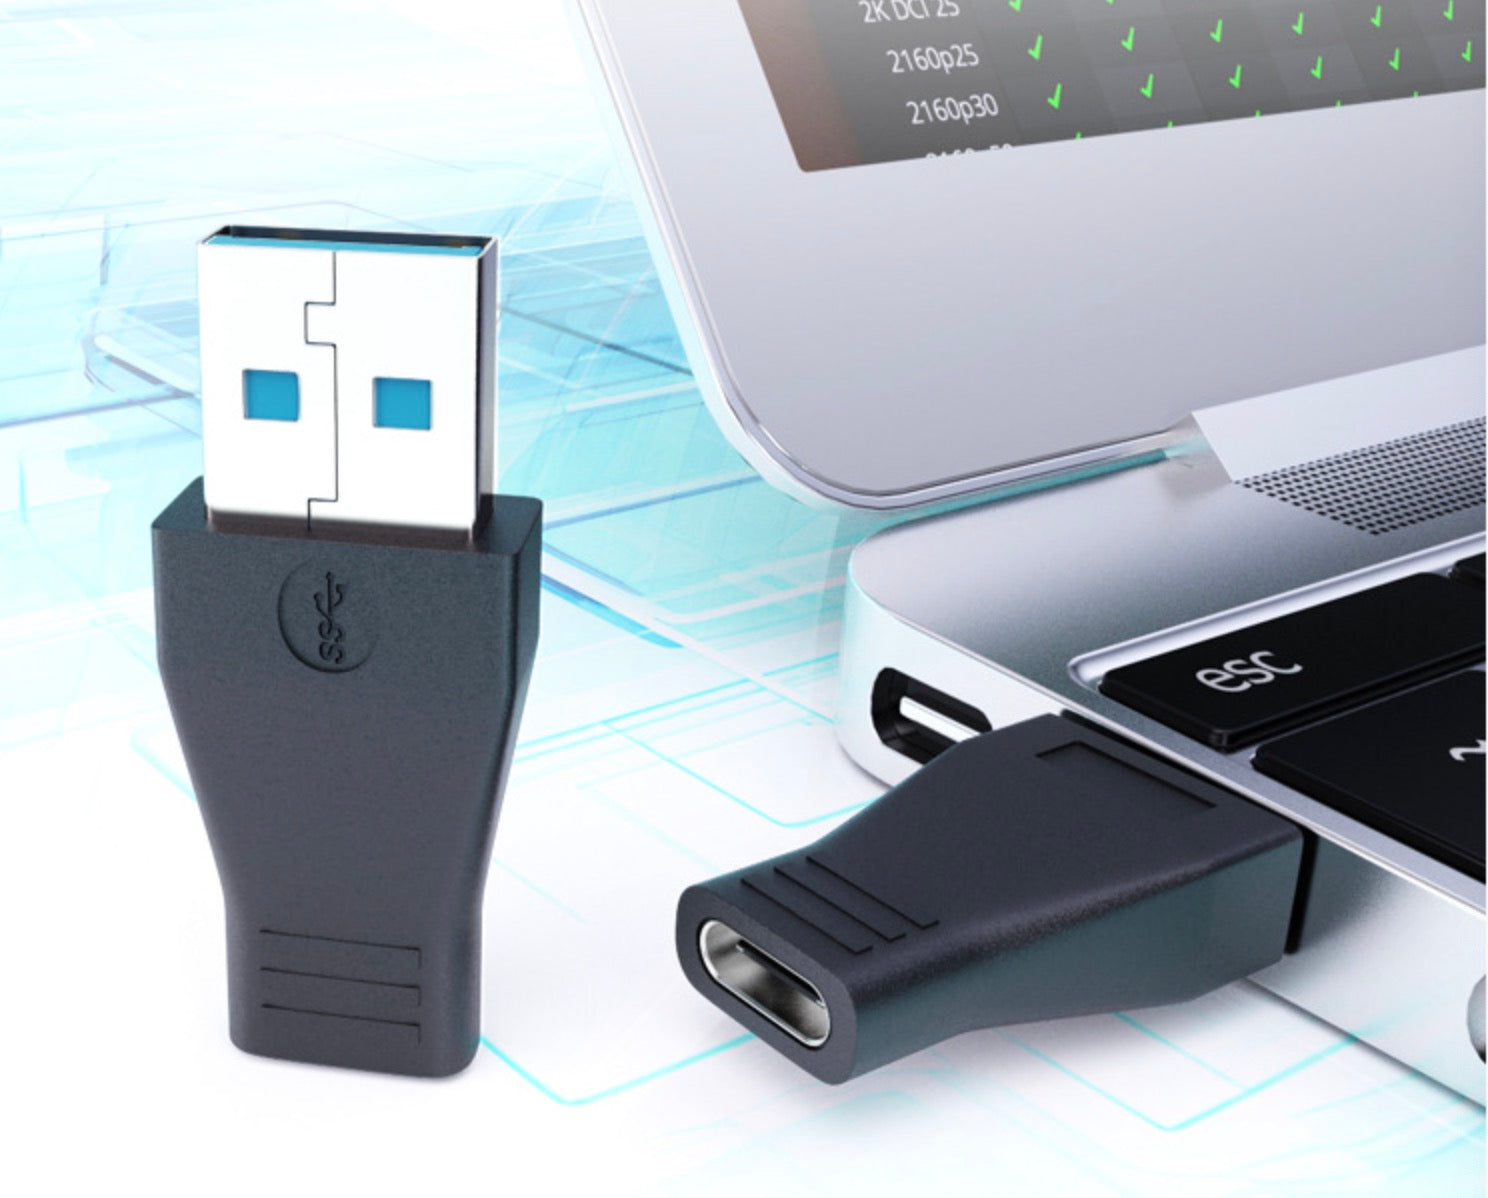 USB 3.0 A Male to USB C Female OTG Converter Extension Adapter